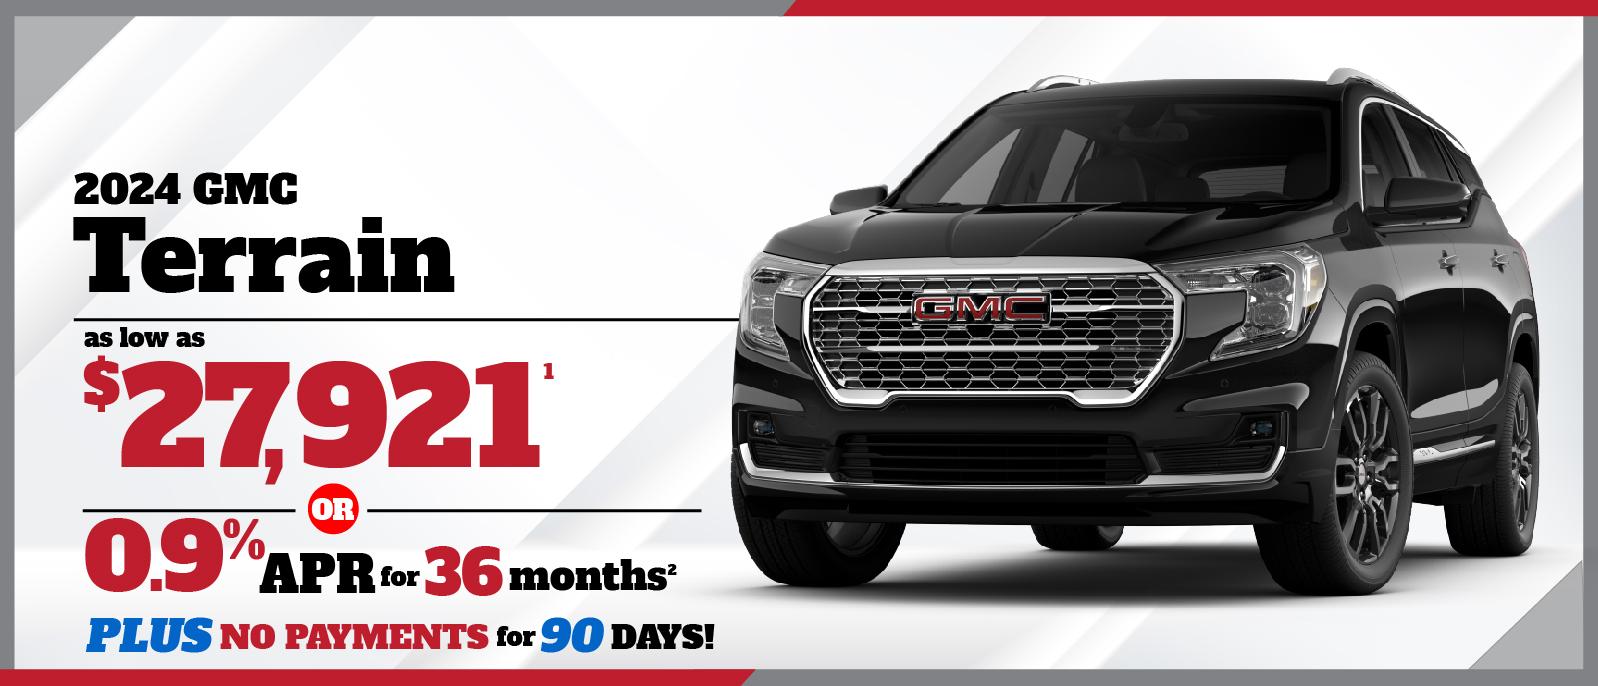 2024 GMC Terrain - as low as $27,921 or 0.9% APR for 36 months plus No Payments for 90 days!